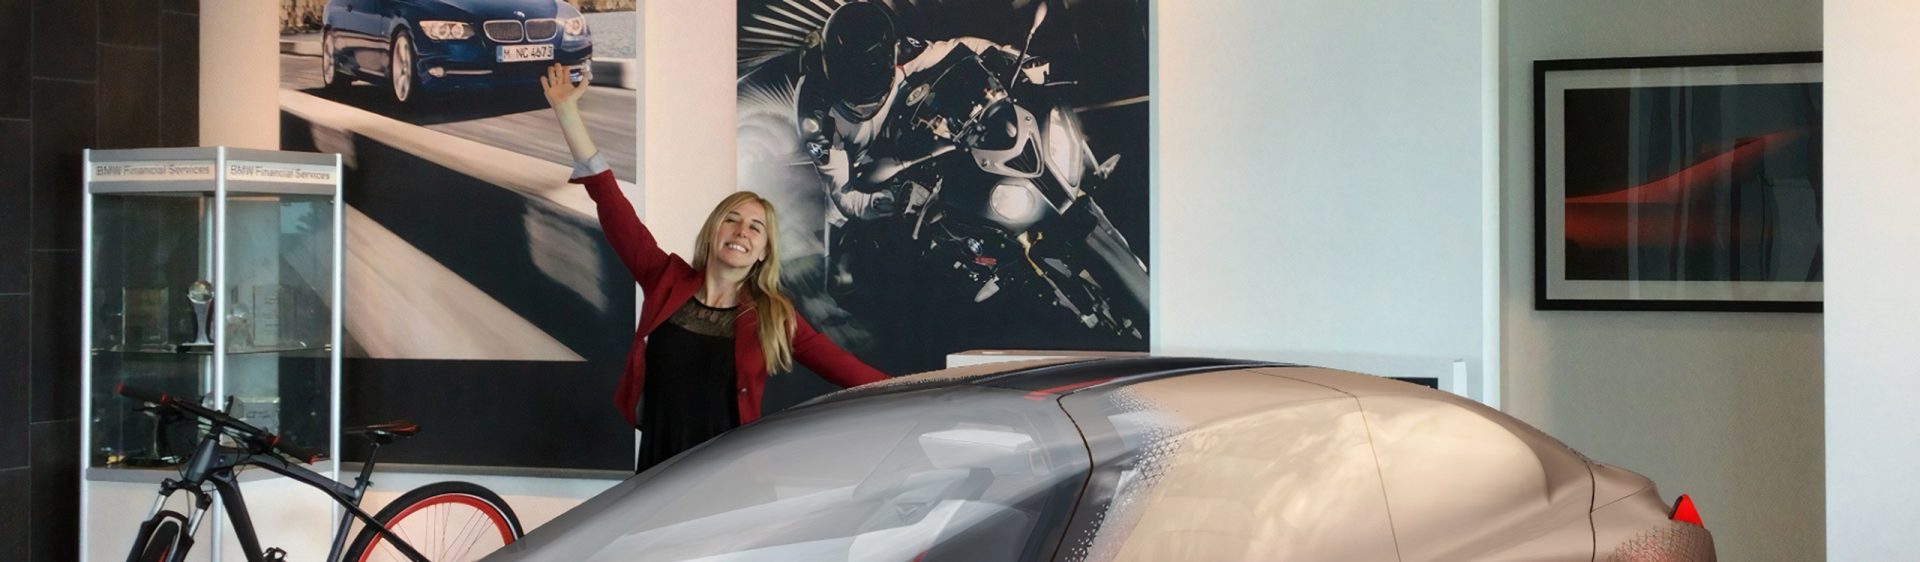 The image shows Kaitlyn Bergeron a Senior Specialist working in Customer Experience at BMW.